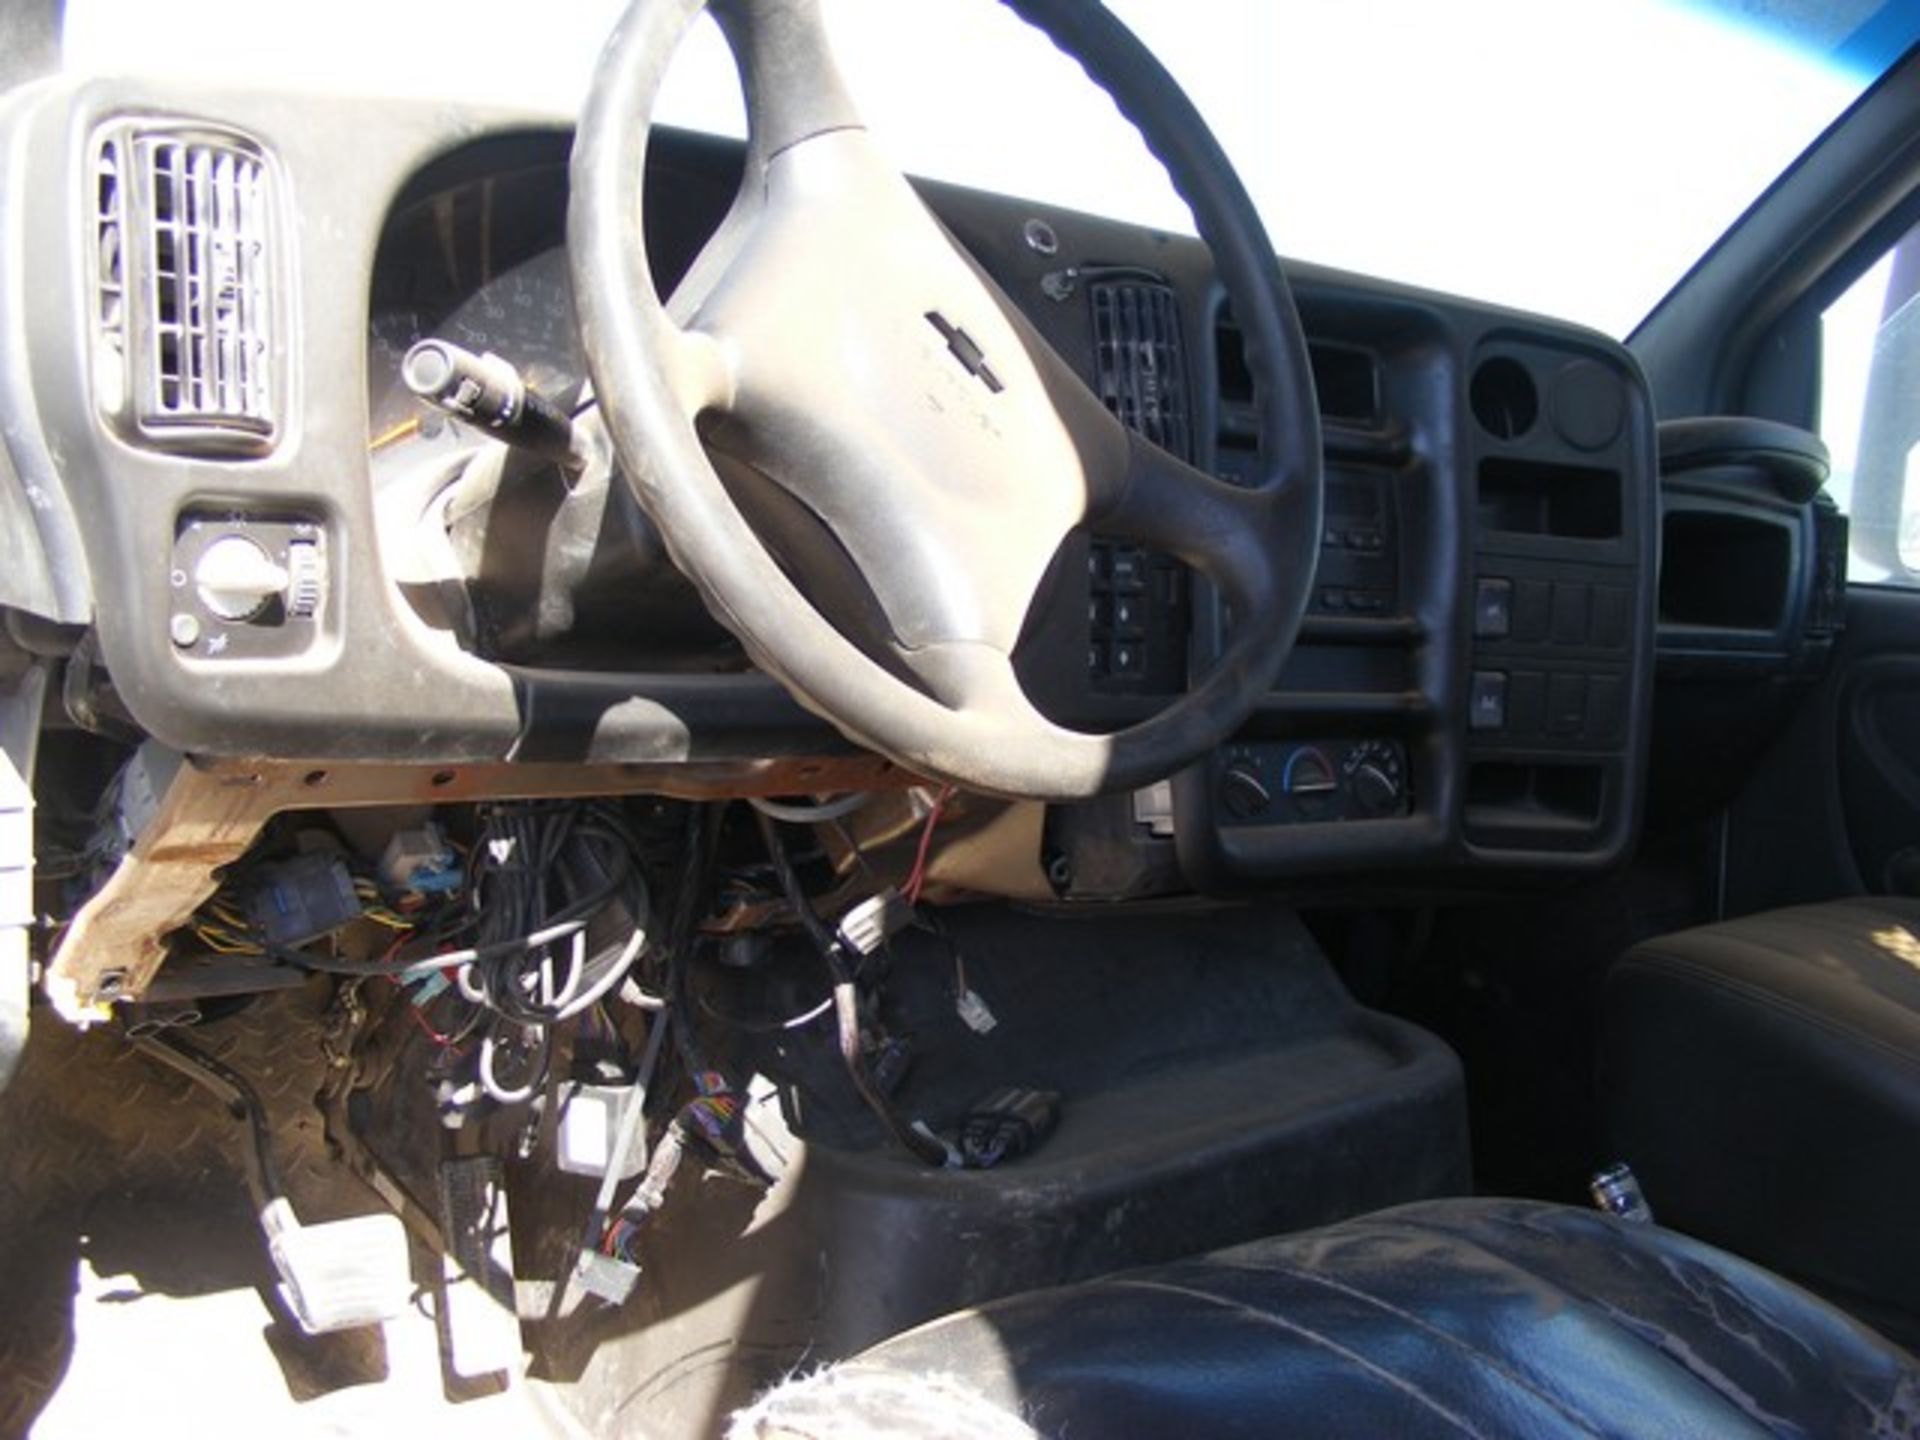 Located in YARD 1 - Midland, TX (2395) (X) 2006 CHEVROLET C7500 S/A DAY CAB STAKE BED TRUCK, VIN- - Image 9 of 10